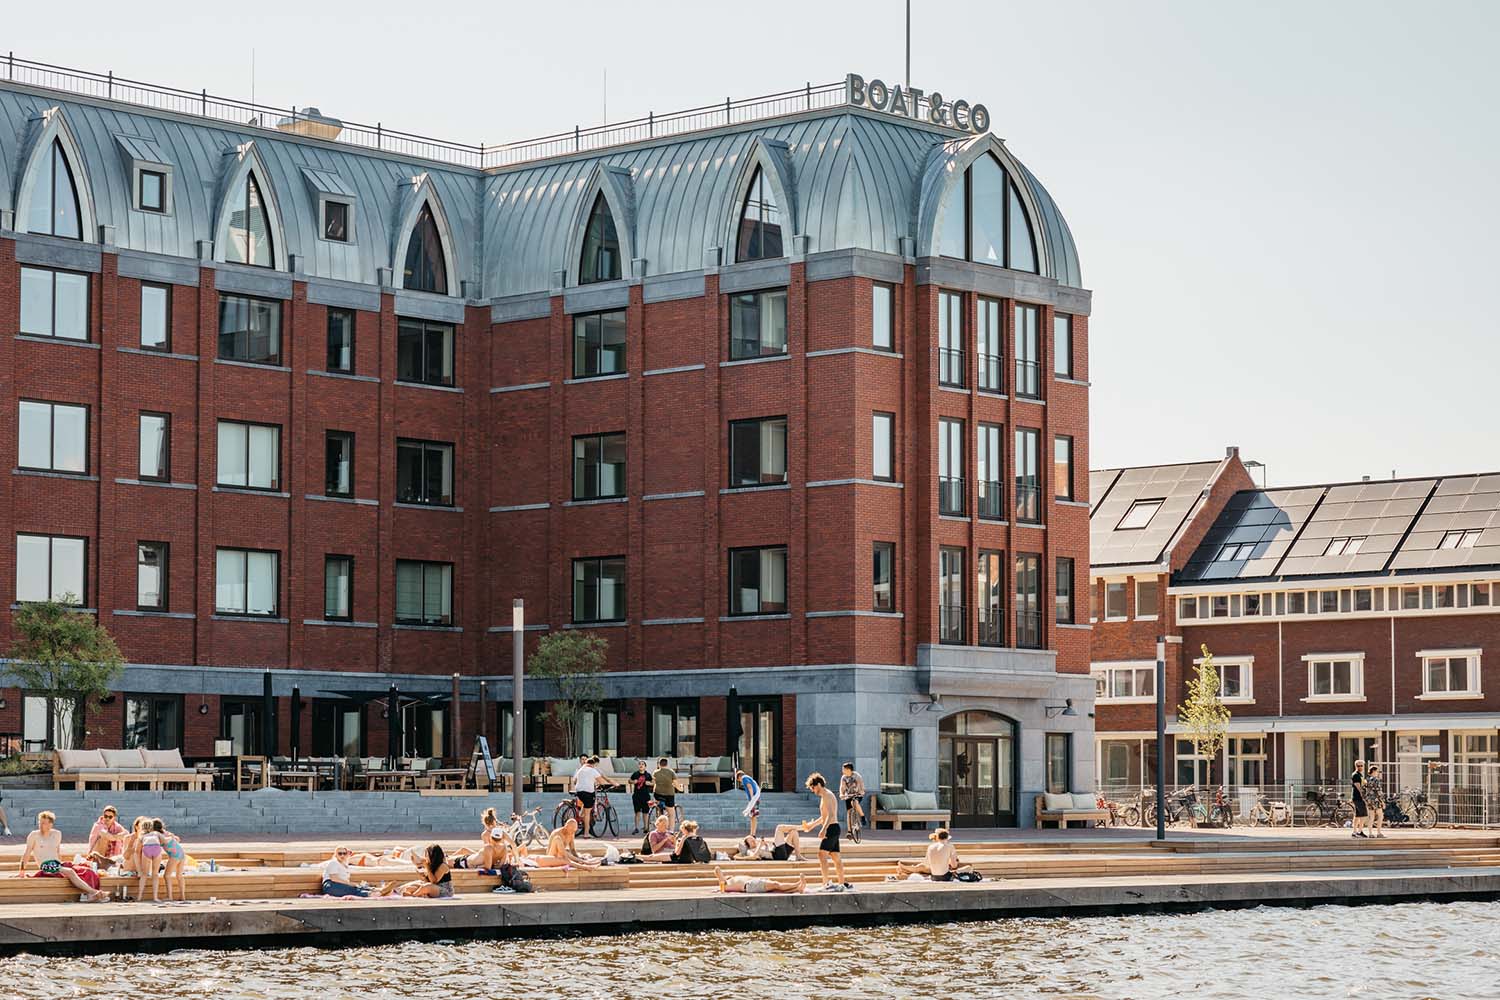 Hotel BOAT&CO Amsterdam，豪华Aparthotel on Amsterdam Houthaven